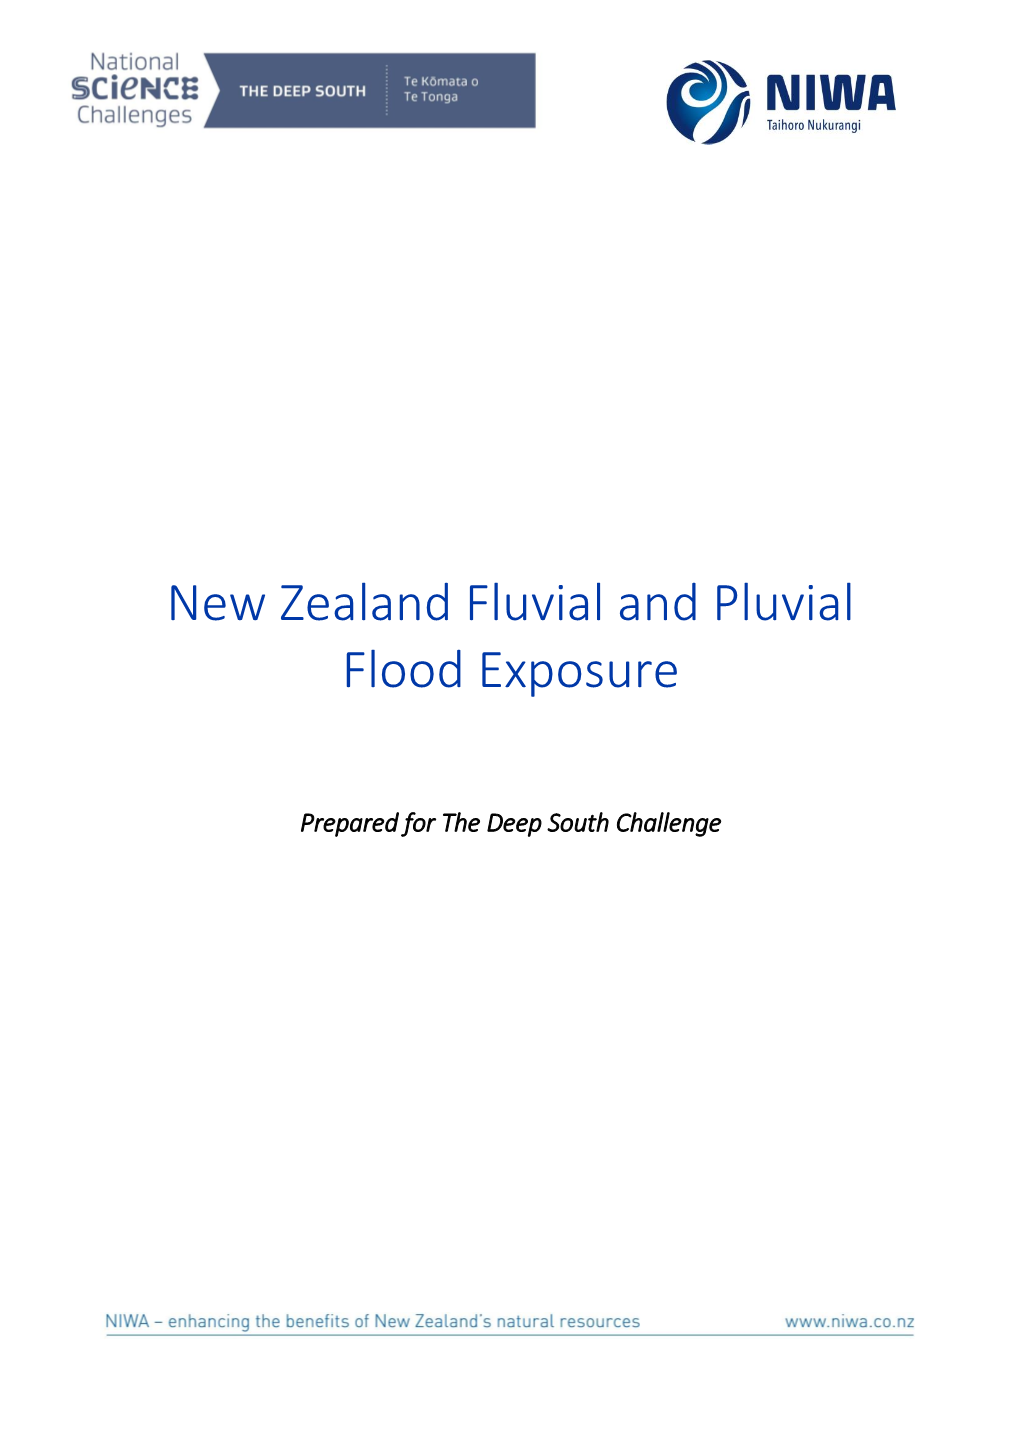 Exposure to River Flooding